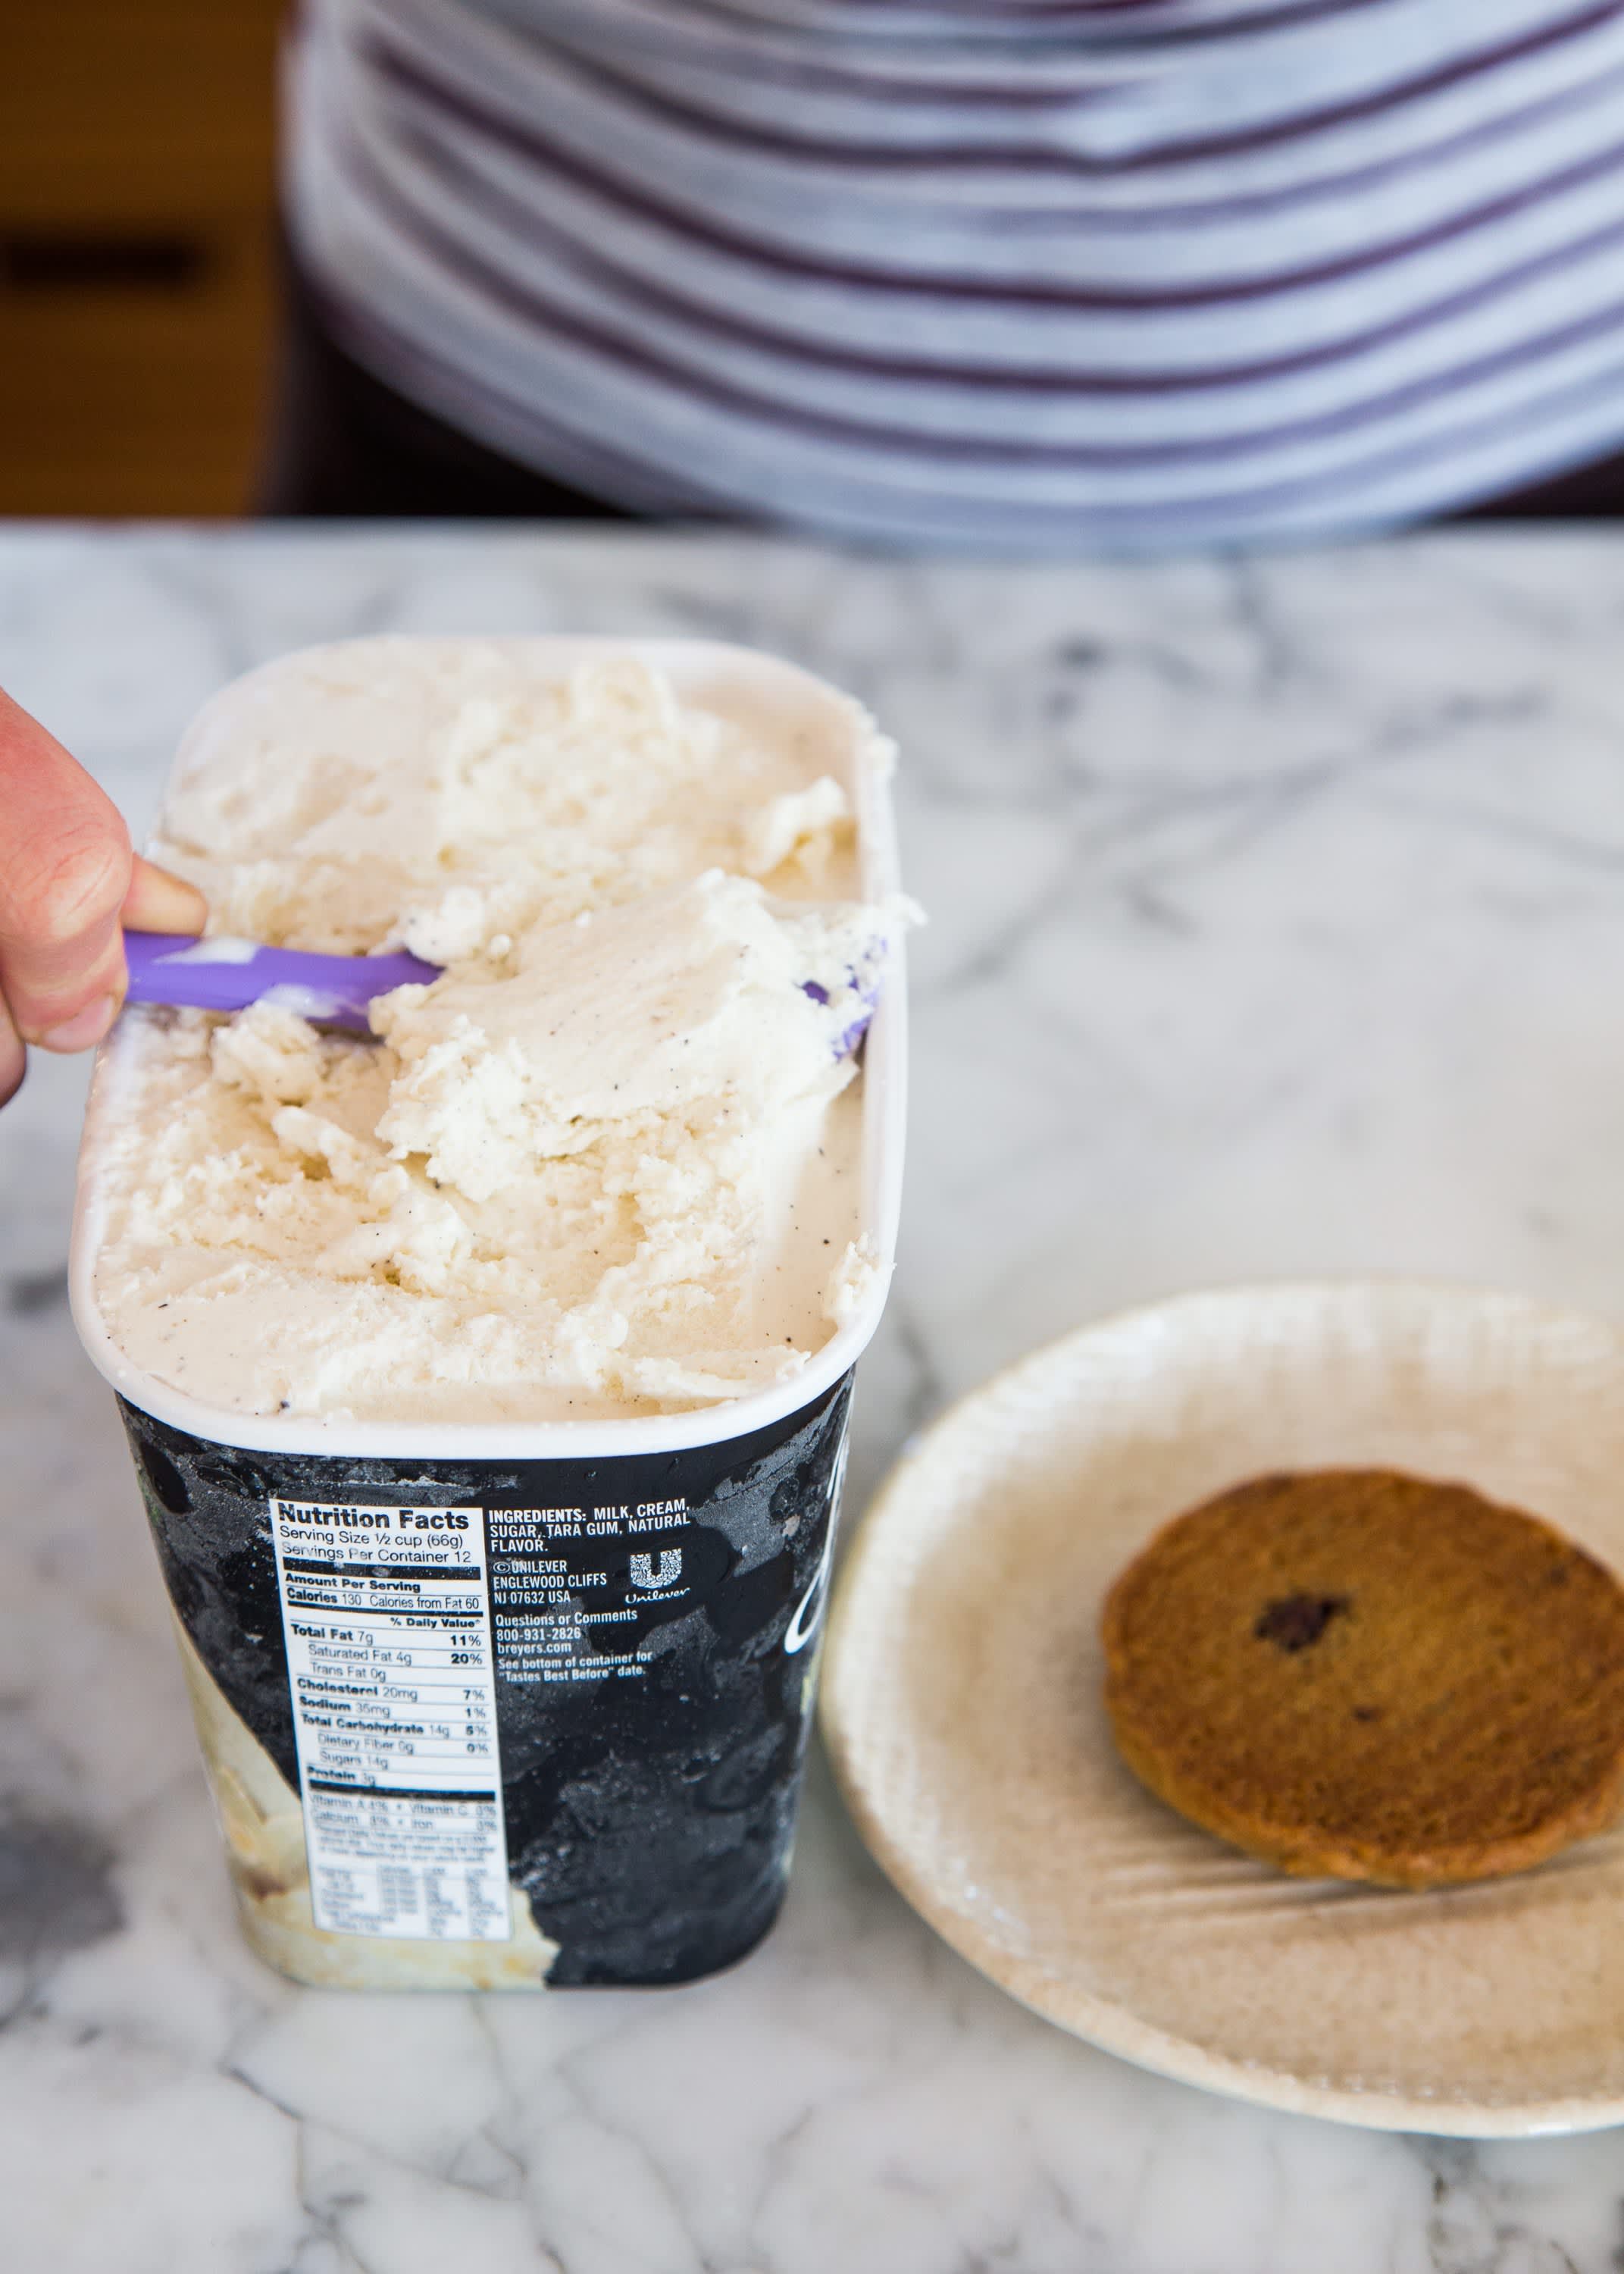 The Absolutely, Positively, Best Way to Make a Perfect Ice Cream